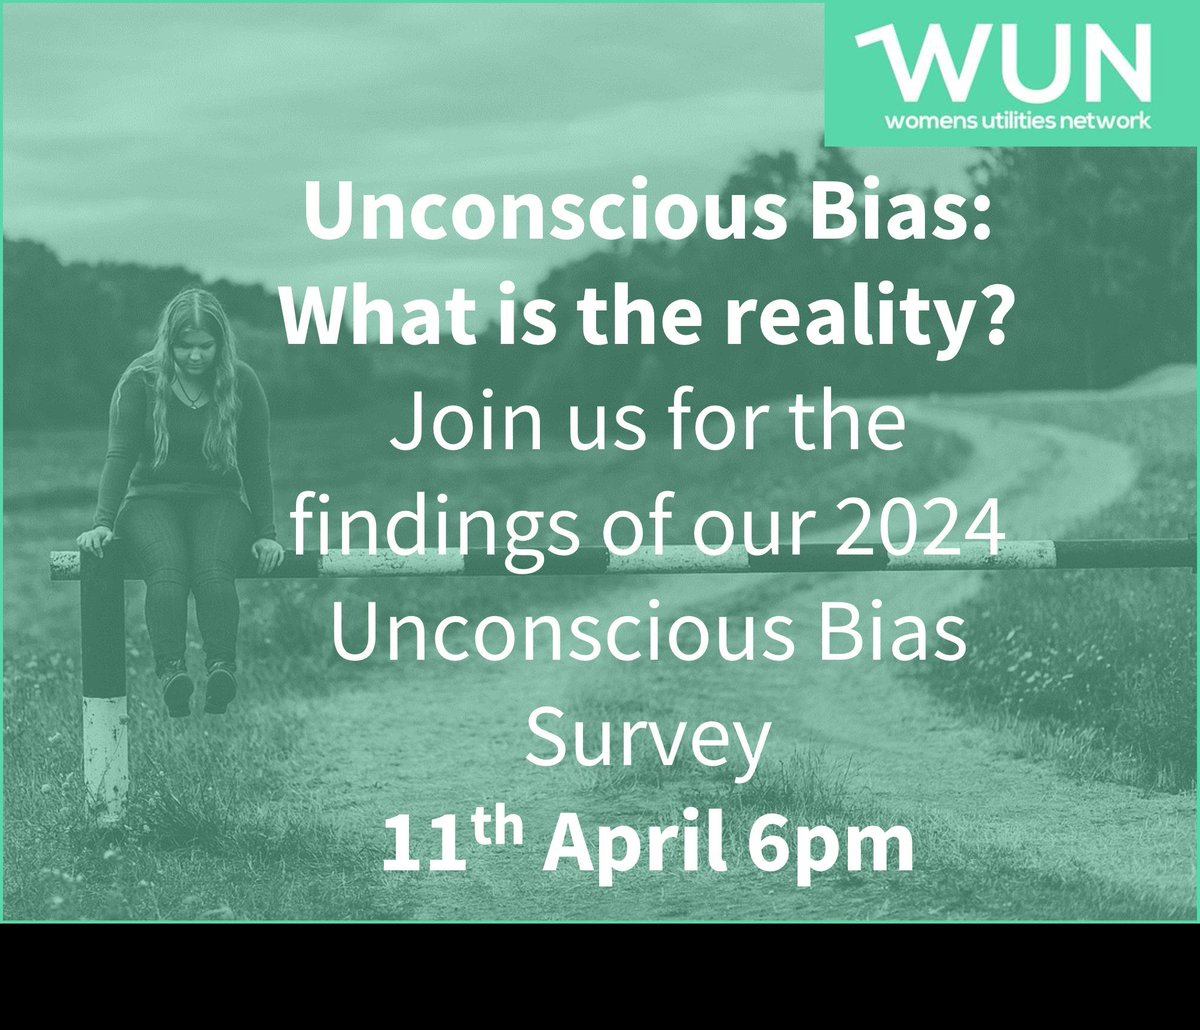 Discover the findings of the #WUN 2024 Unconscious Bias Survey.
Our survey  has just recently closed and while we're busy analysing the results, we wanted to invite you to the launch event on 11 April  where the results will be shared 
thewun.co.uk/wun-events/
#unconciousbias